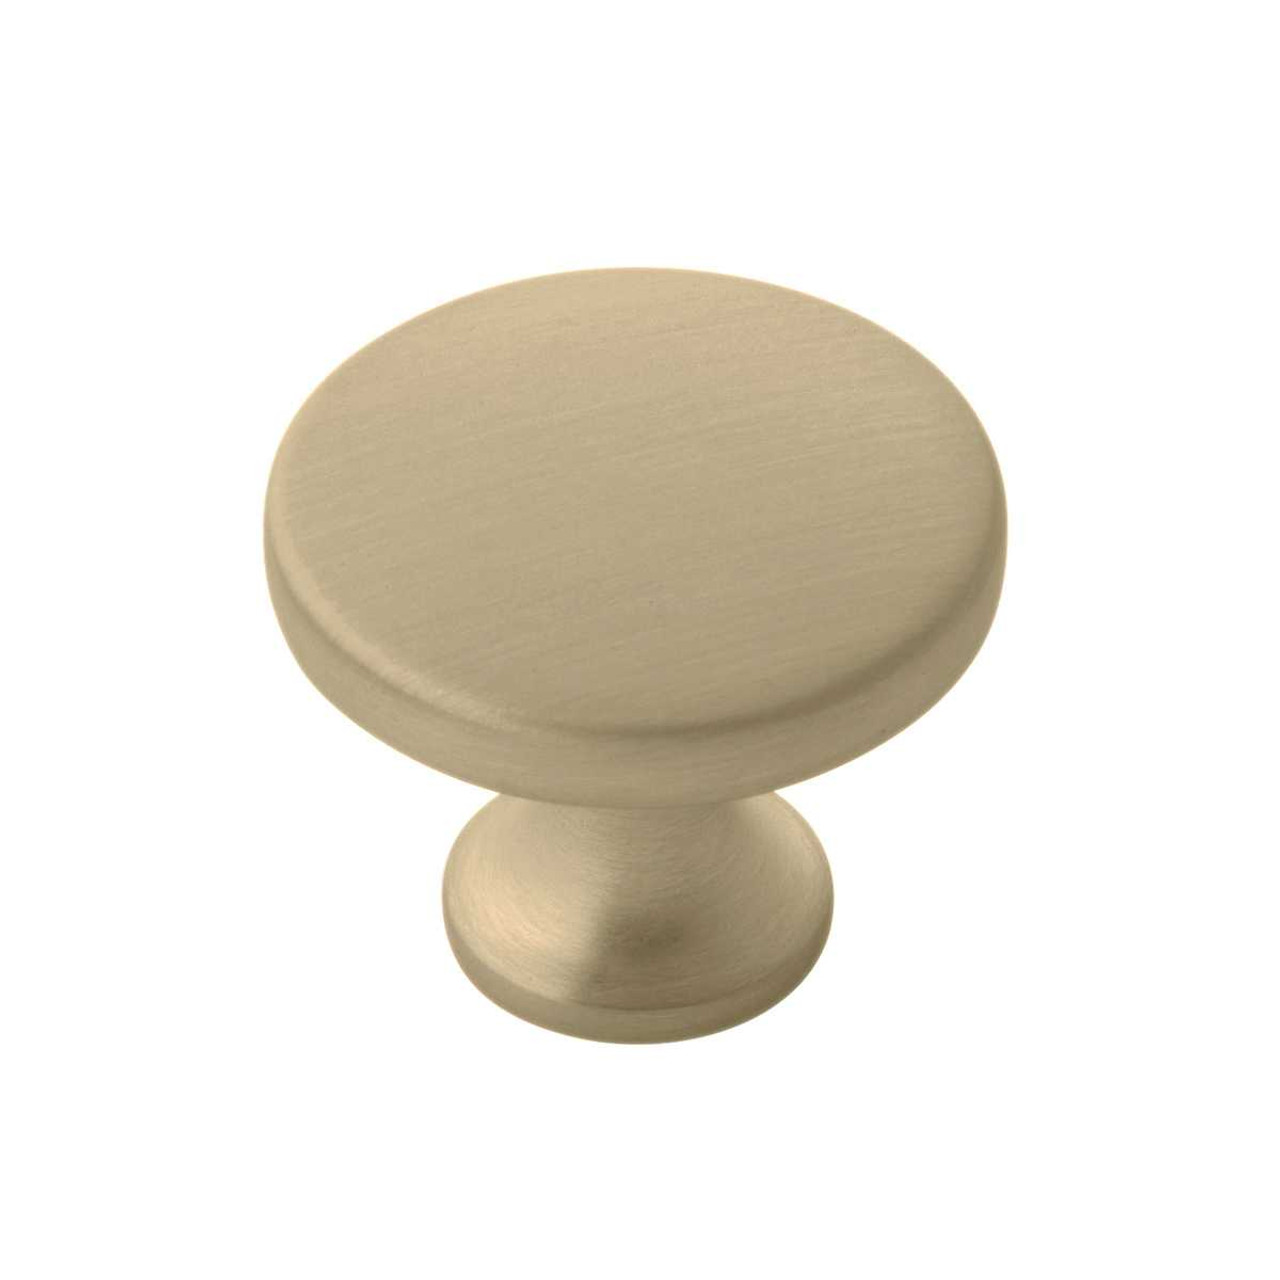 https://cdn11.bigcommerce.com/s-1xpphv/images/stencil/1280x1280/products/902/14610/HICKORY-Forge-1-38-Round-Cabinet-Knob-Brushed-Golden-Brass-H076698-BGB_8960__01544.1674495114.jpg?c=2